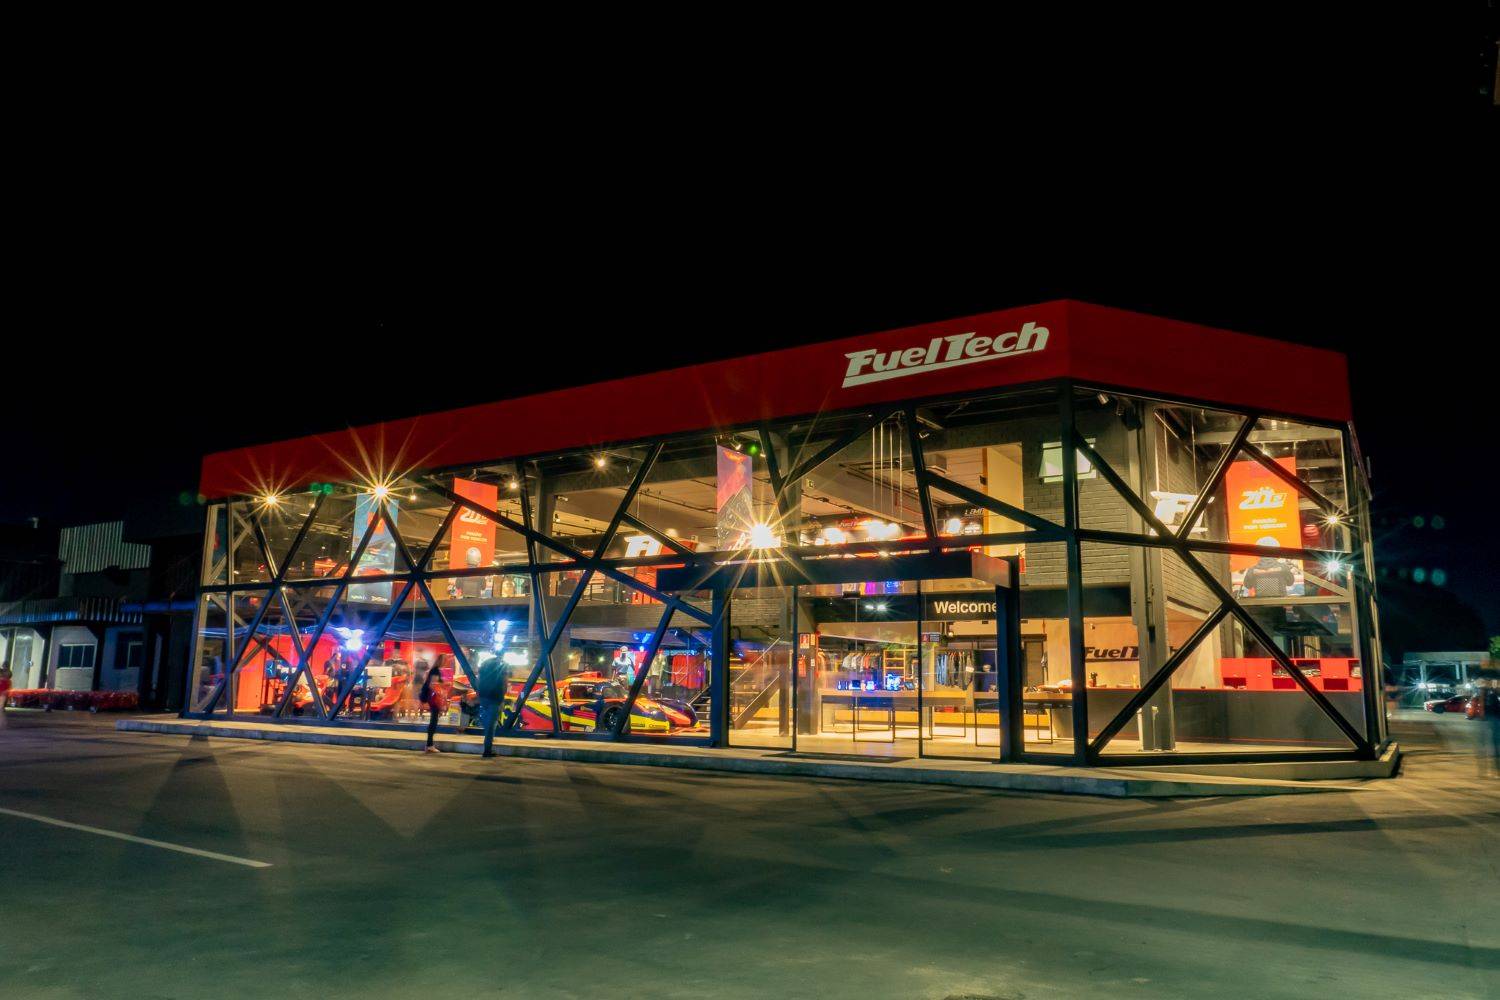 A nighttime view of the FT STORE at FuelTech's new headquarters.